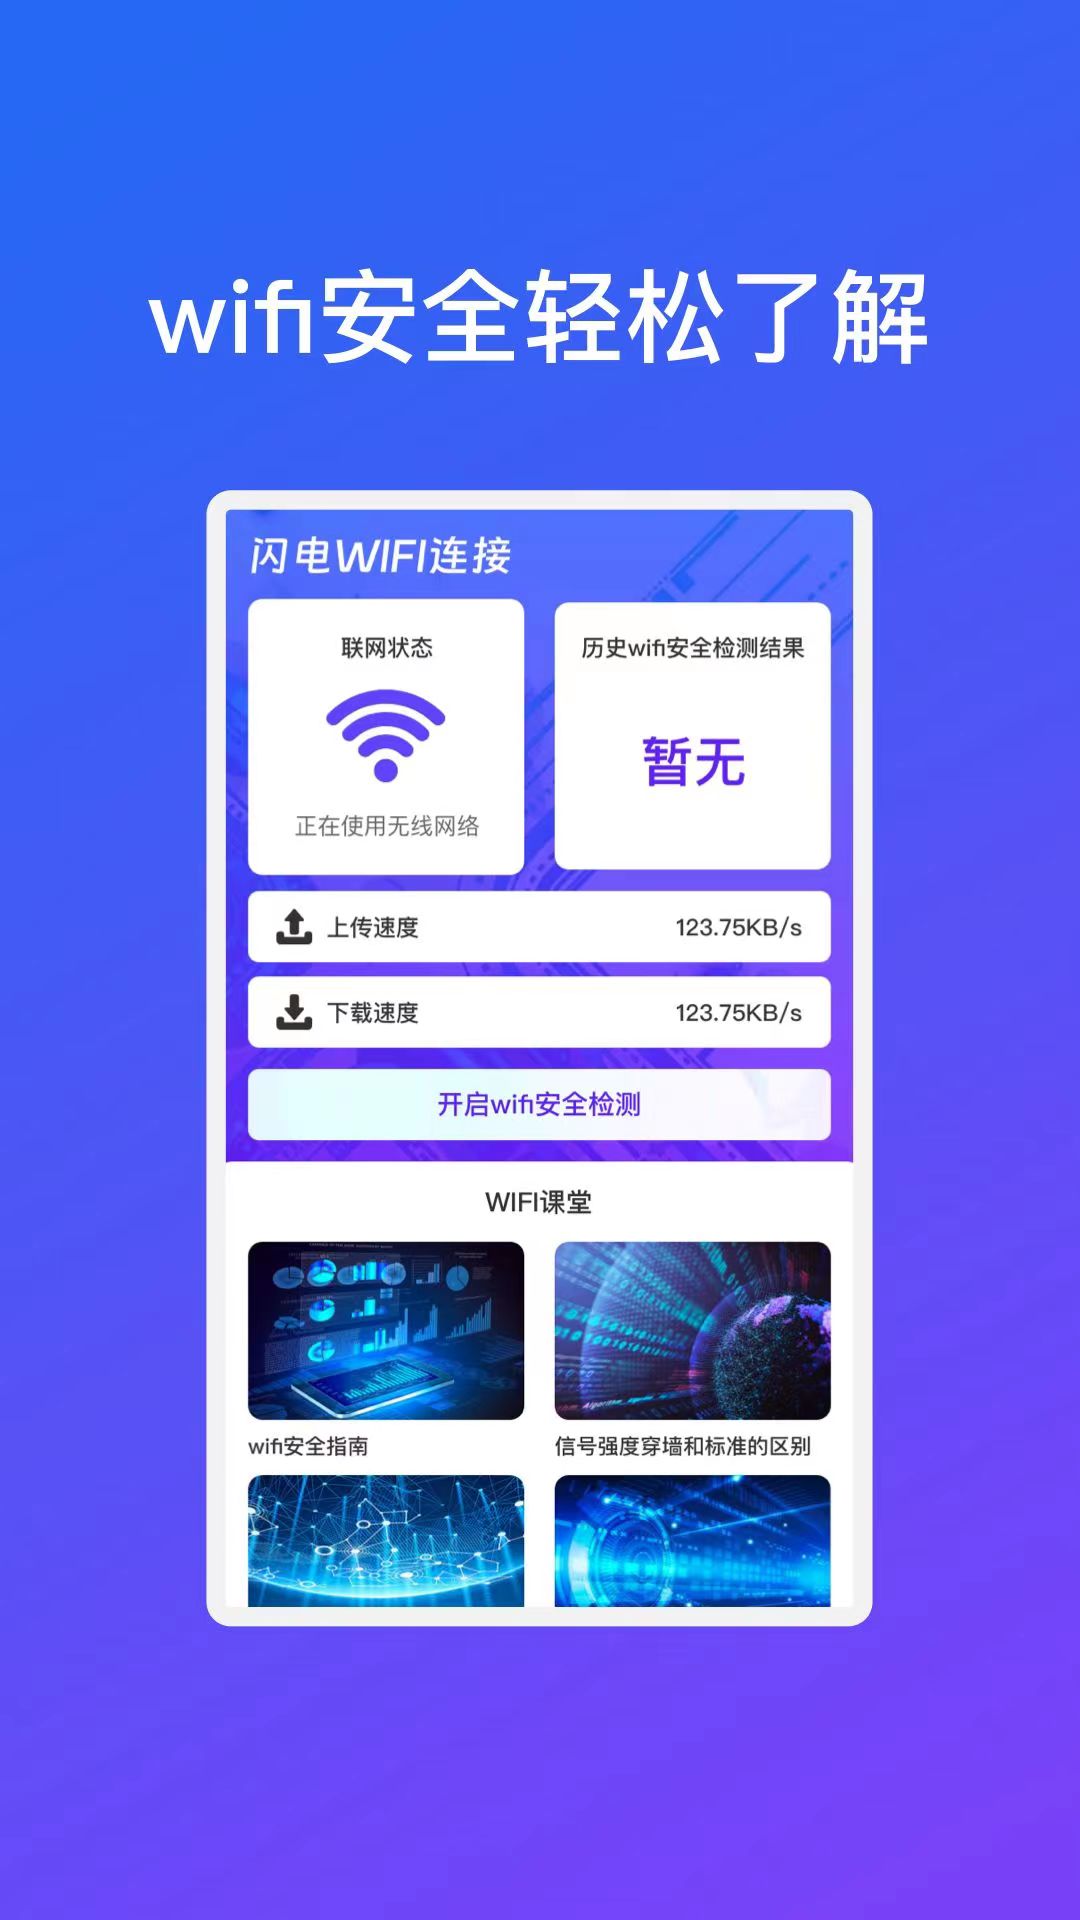 WiFiv1.0.2 ٷ